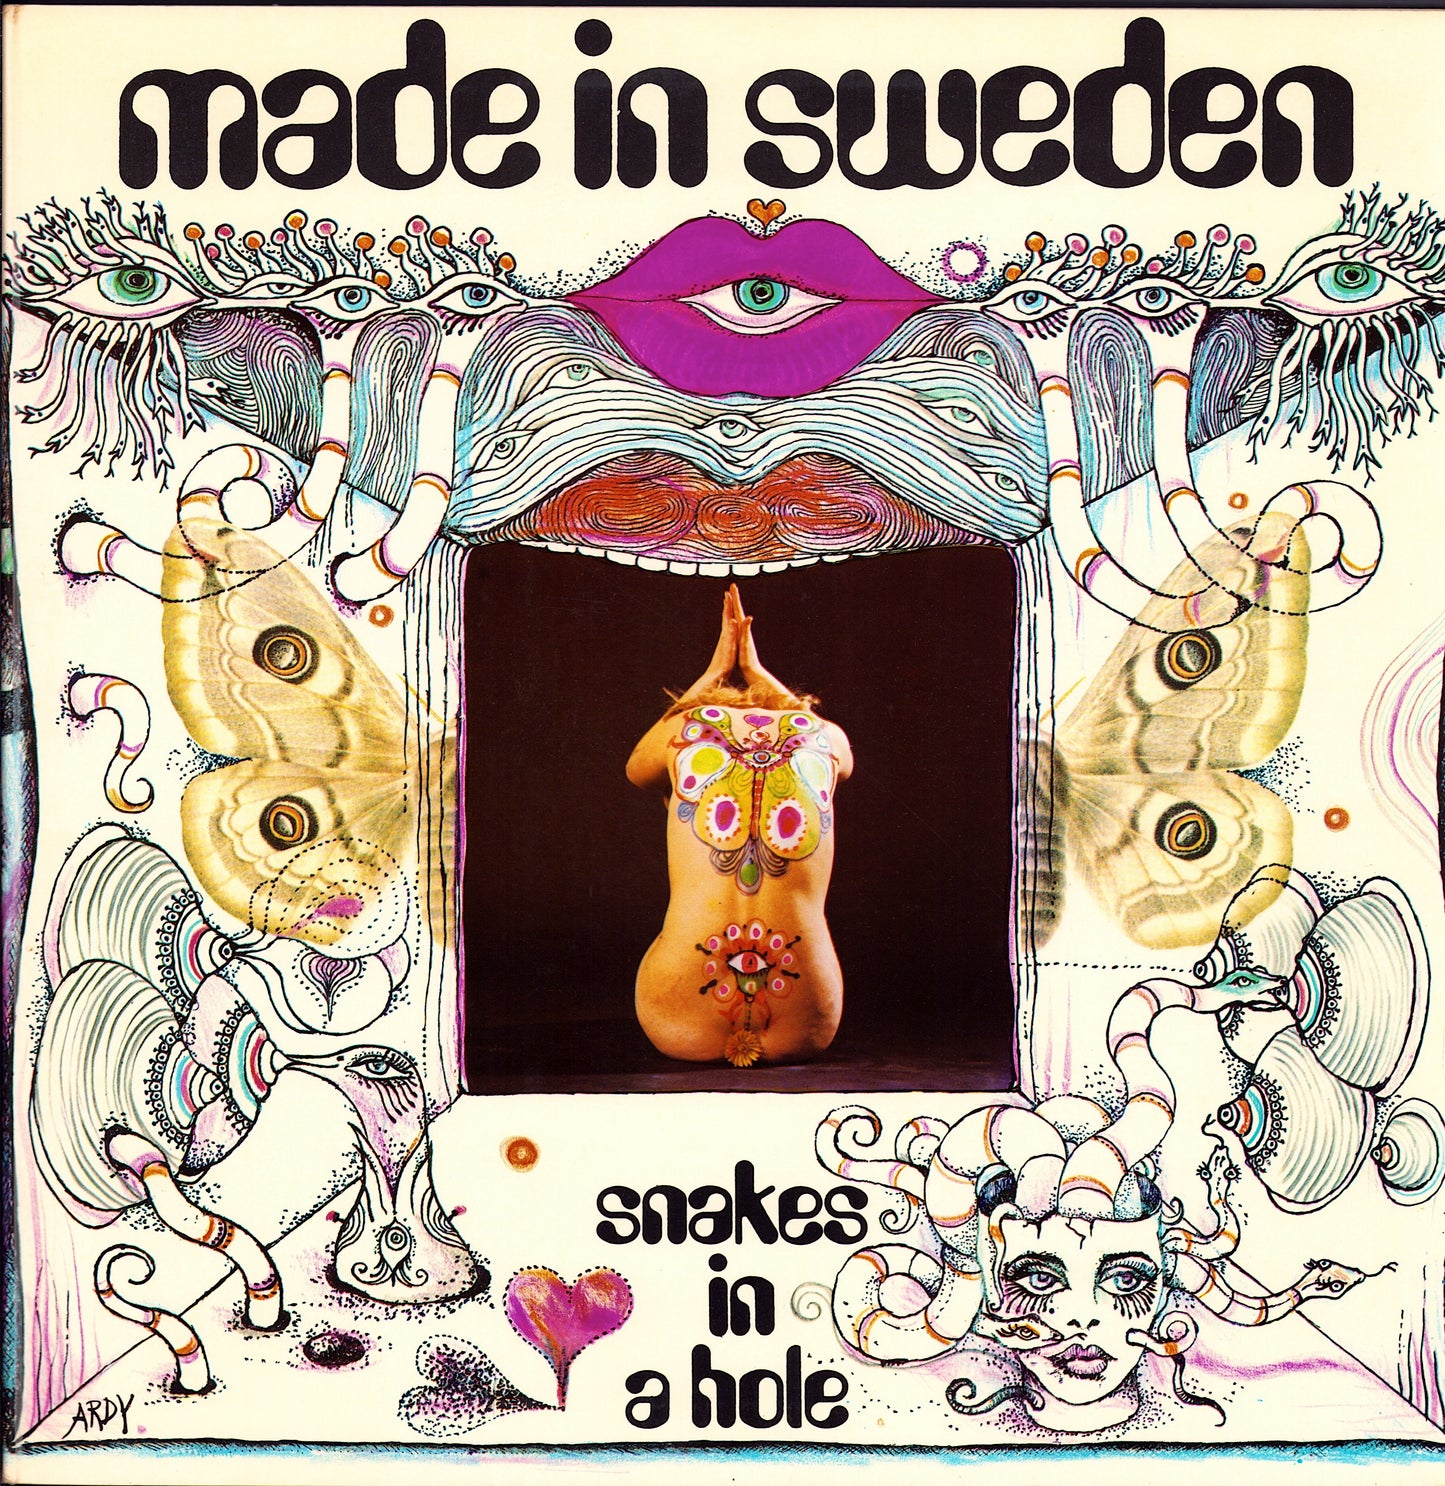 Made In Sweden ‎- Snakes In A Hole Vinyl LP